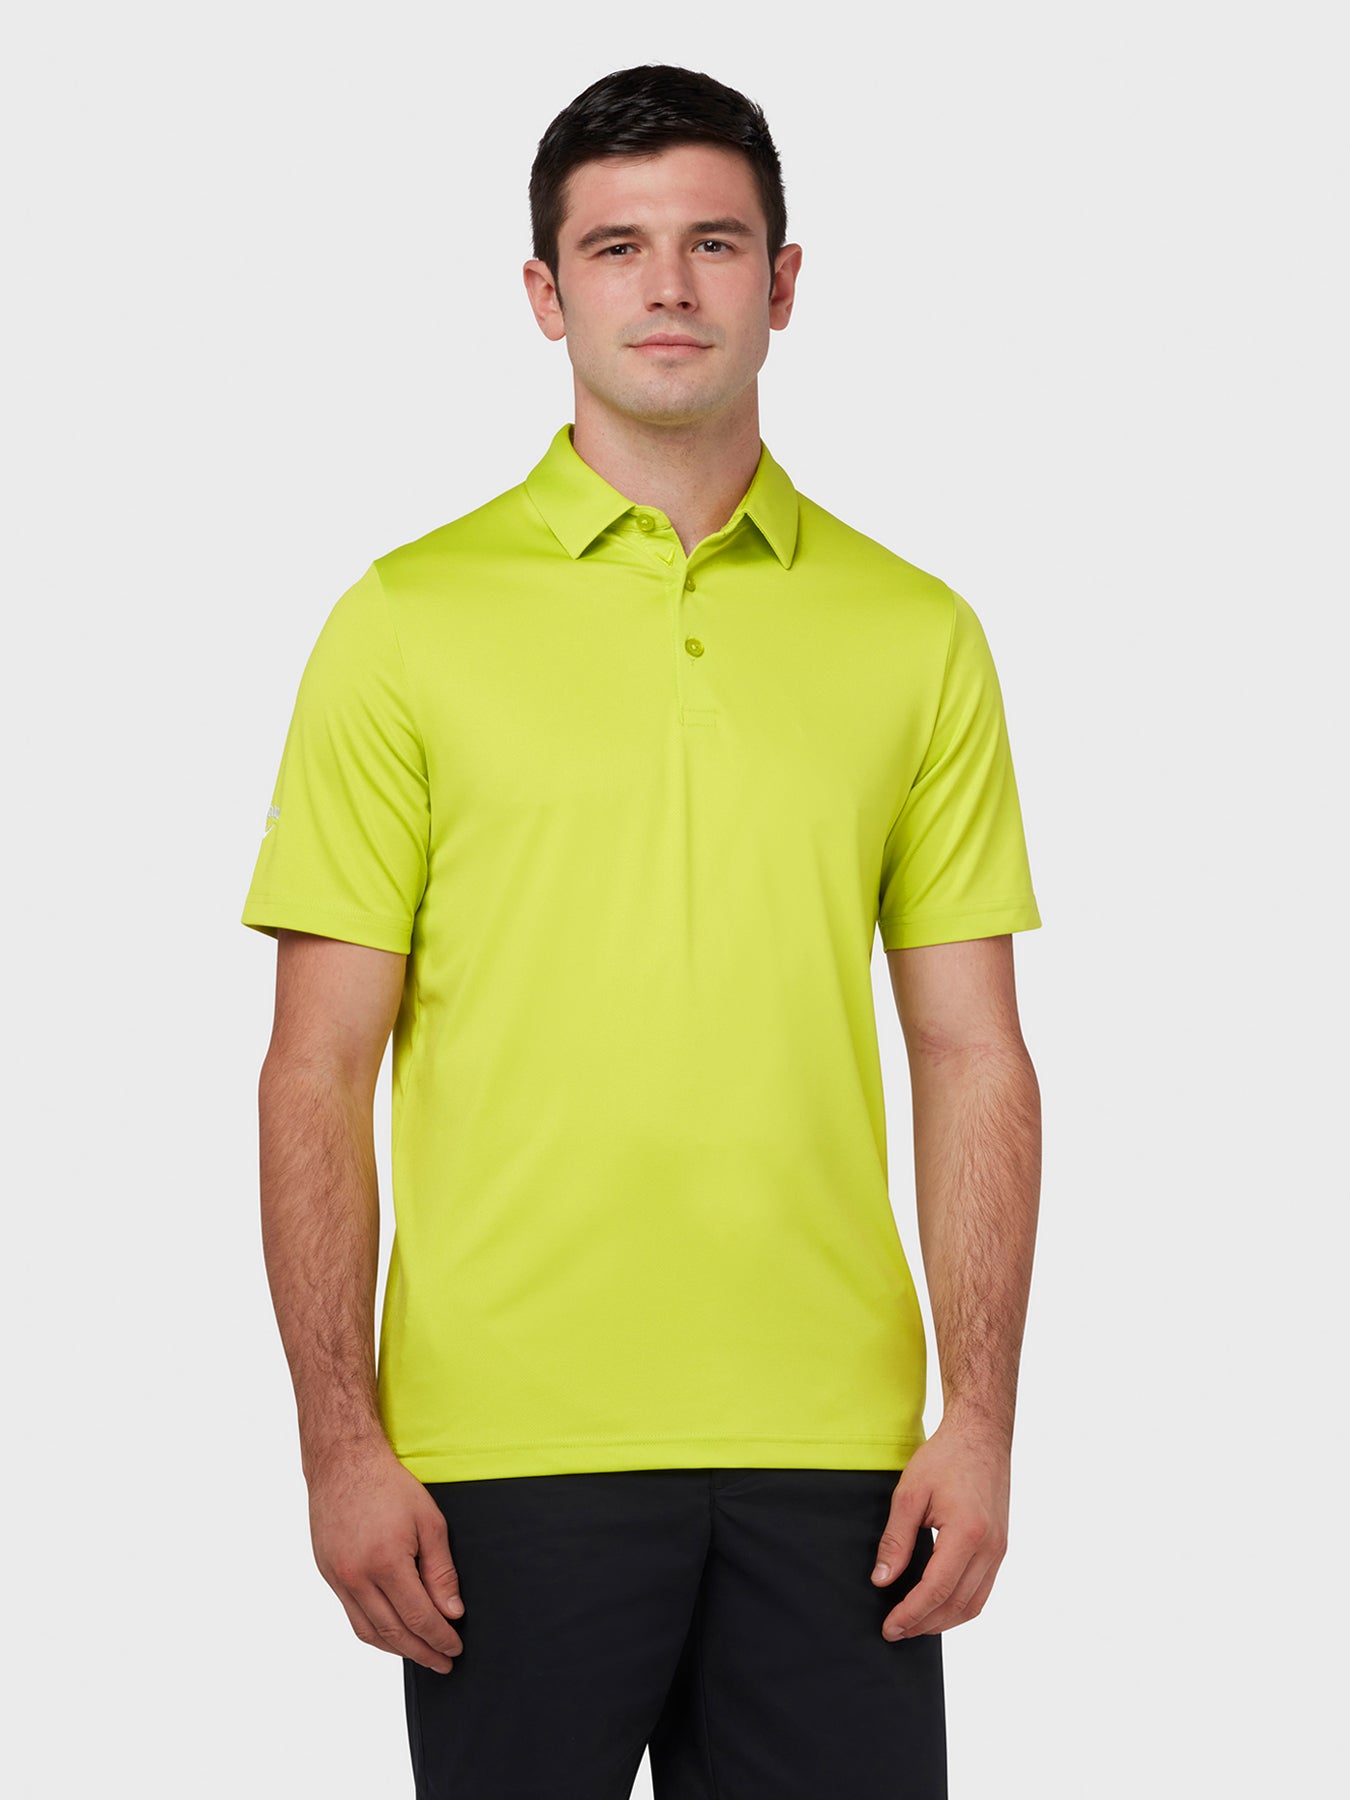 View Swing Tech Tour Polo In Surreal Green Surreal Green 4XL information